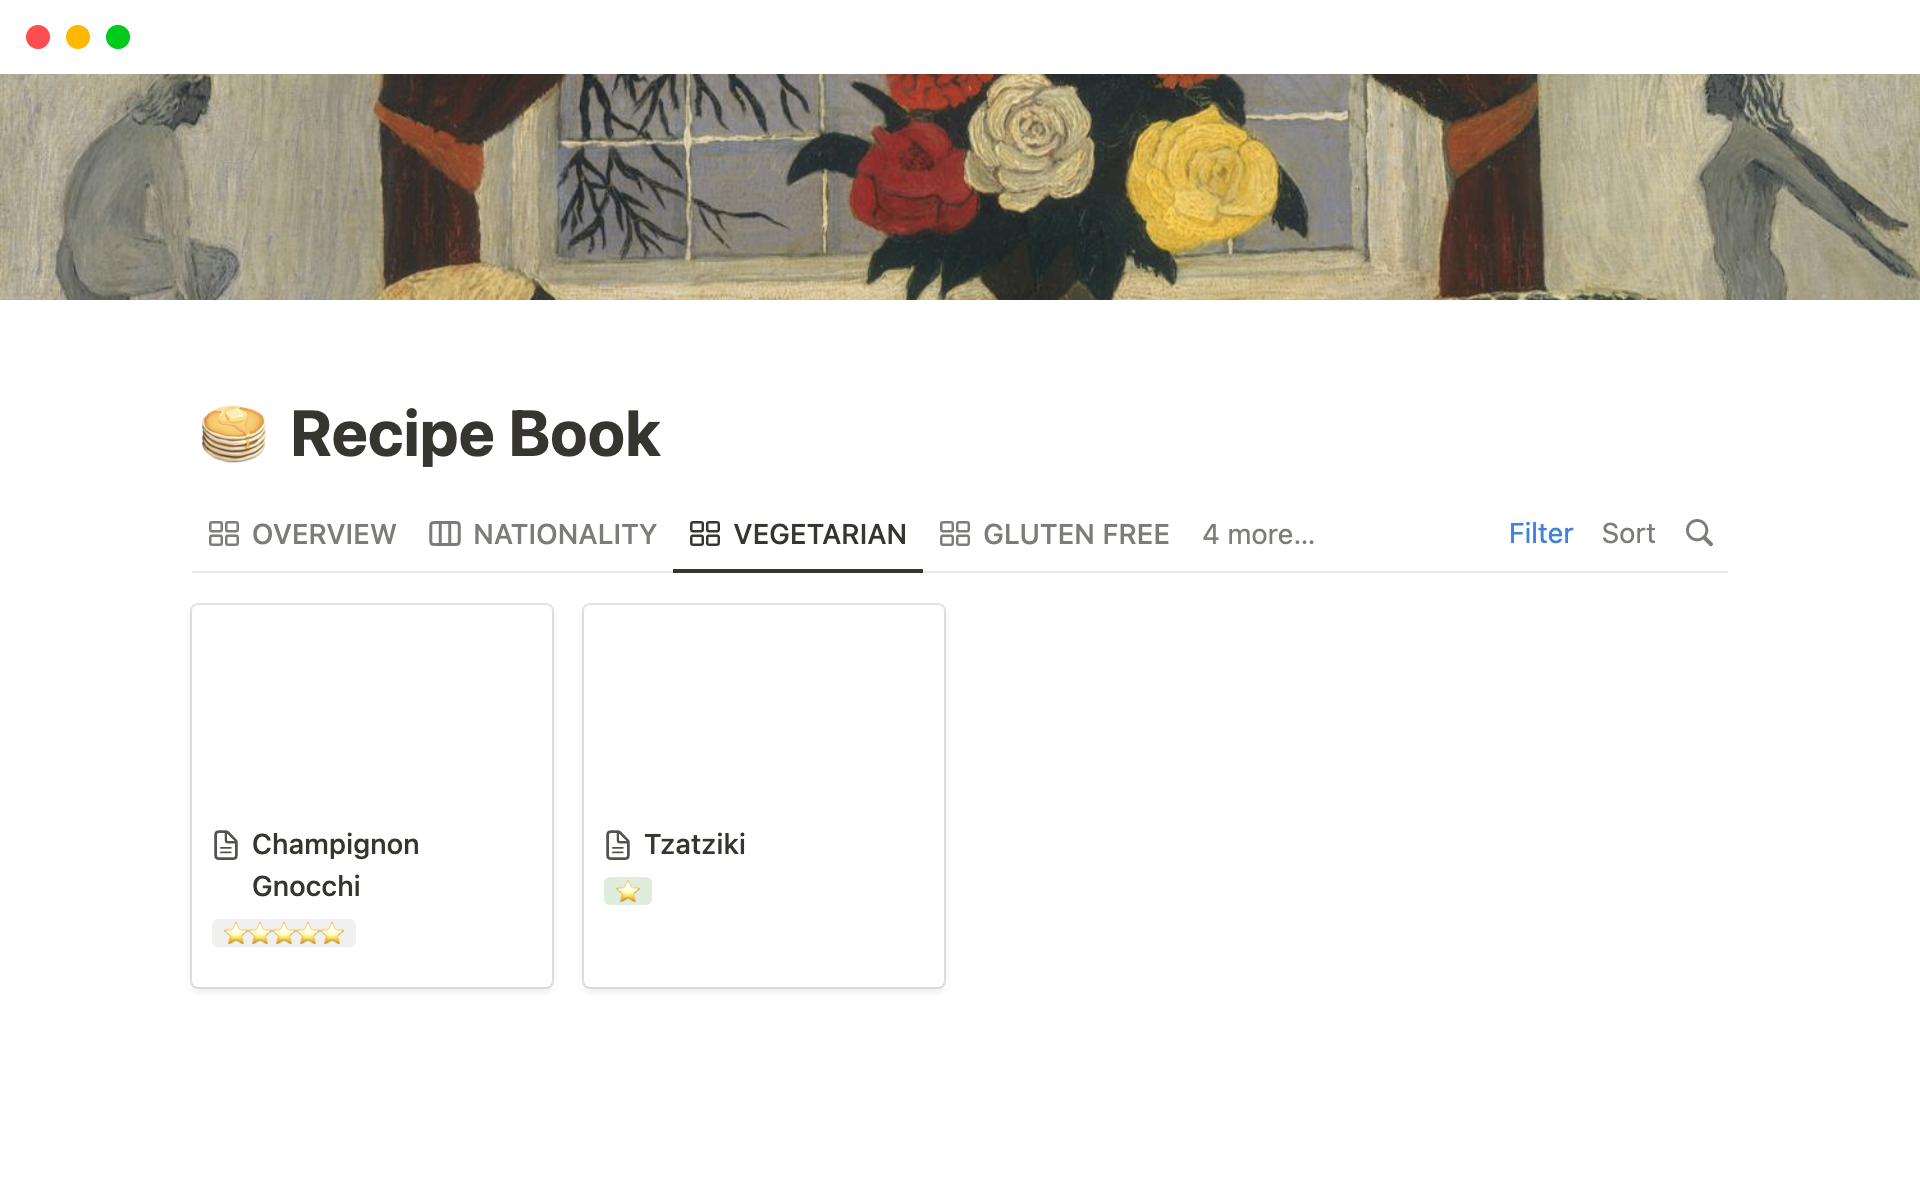 Get organized and take your cooking game to the next level with the Notion Recipe Book template.